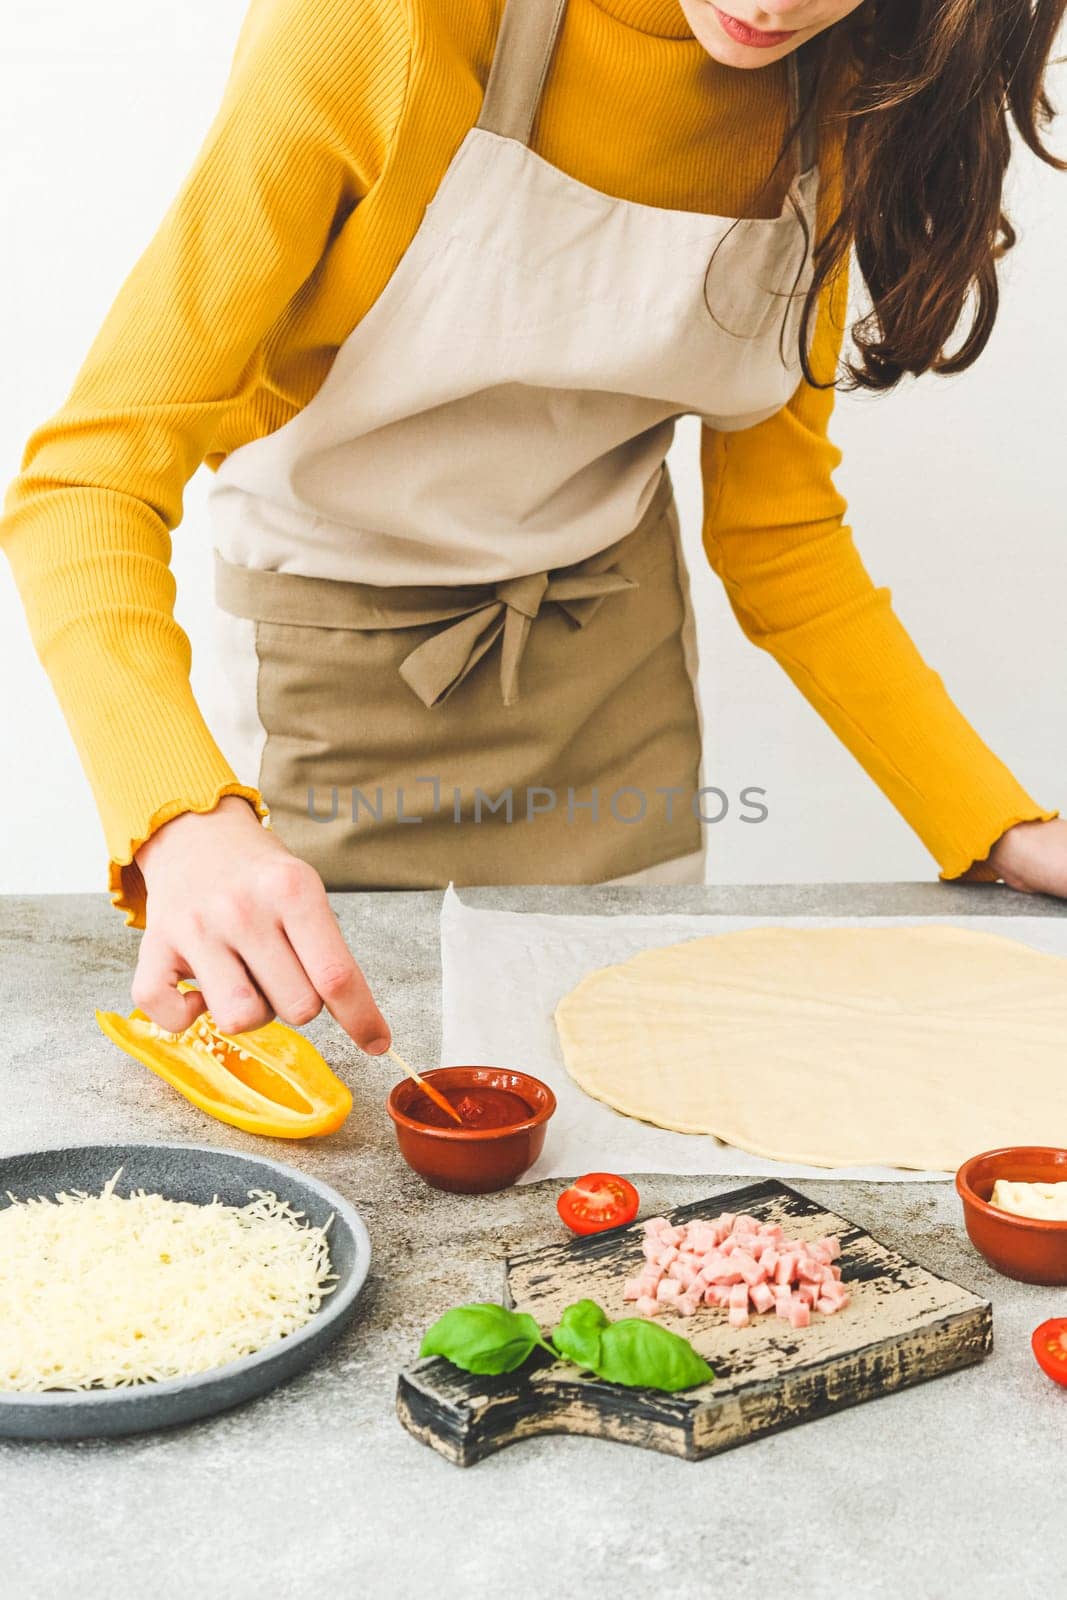 Caucasian teenage girl in an apron at the table with ingredients and dough mixes the sauce for making pizza with a toothpick,